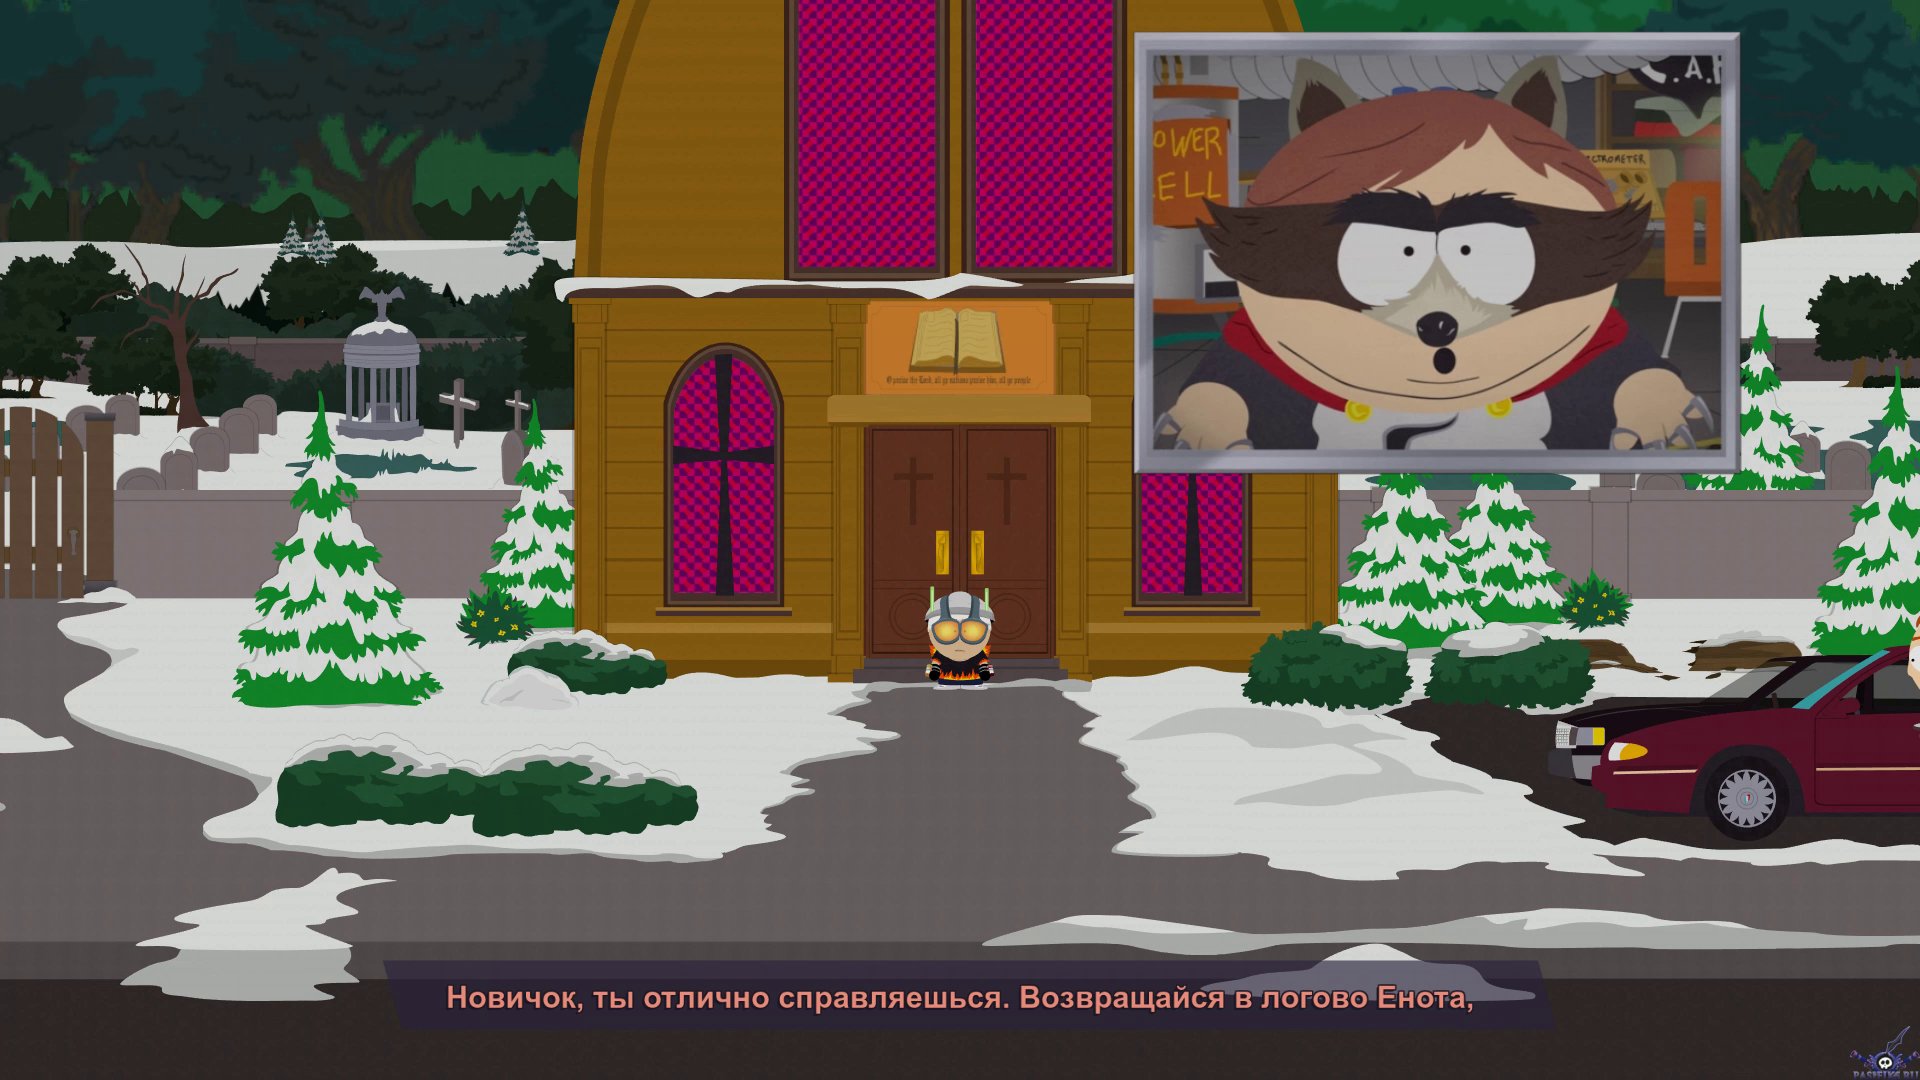 South park the fractured but whole купить ключ steam дешево фото 63